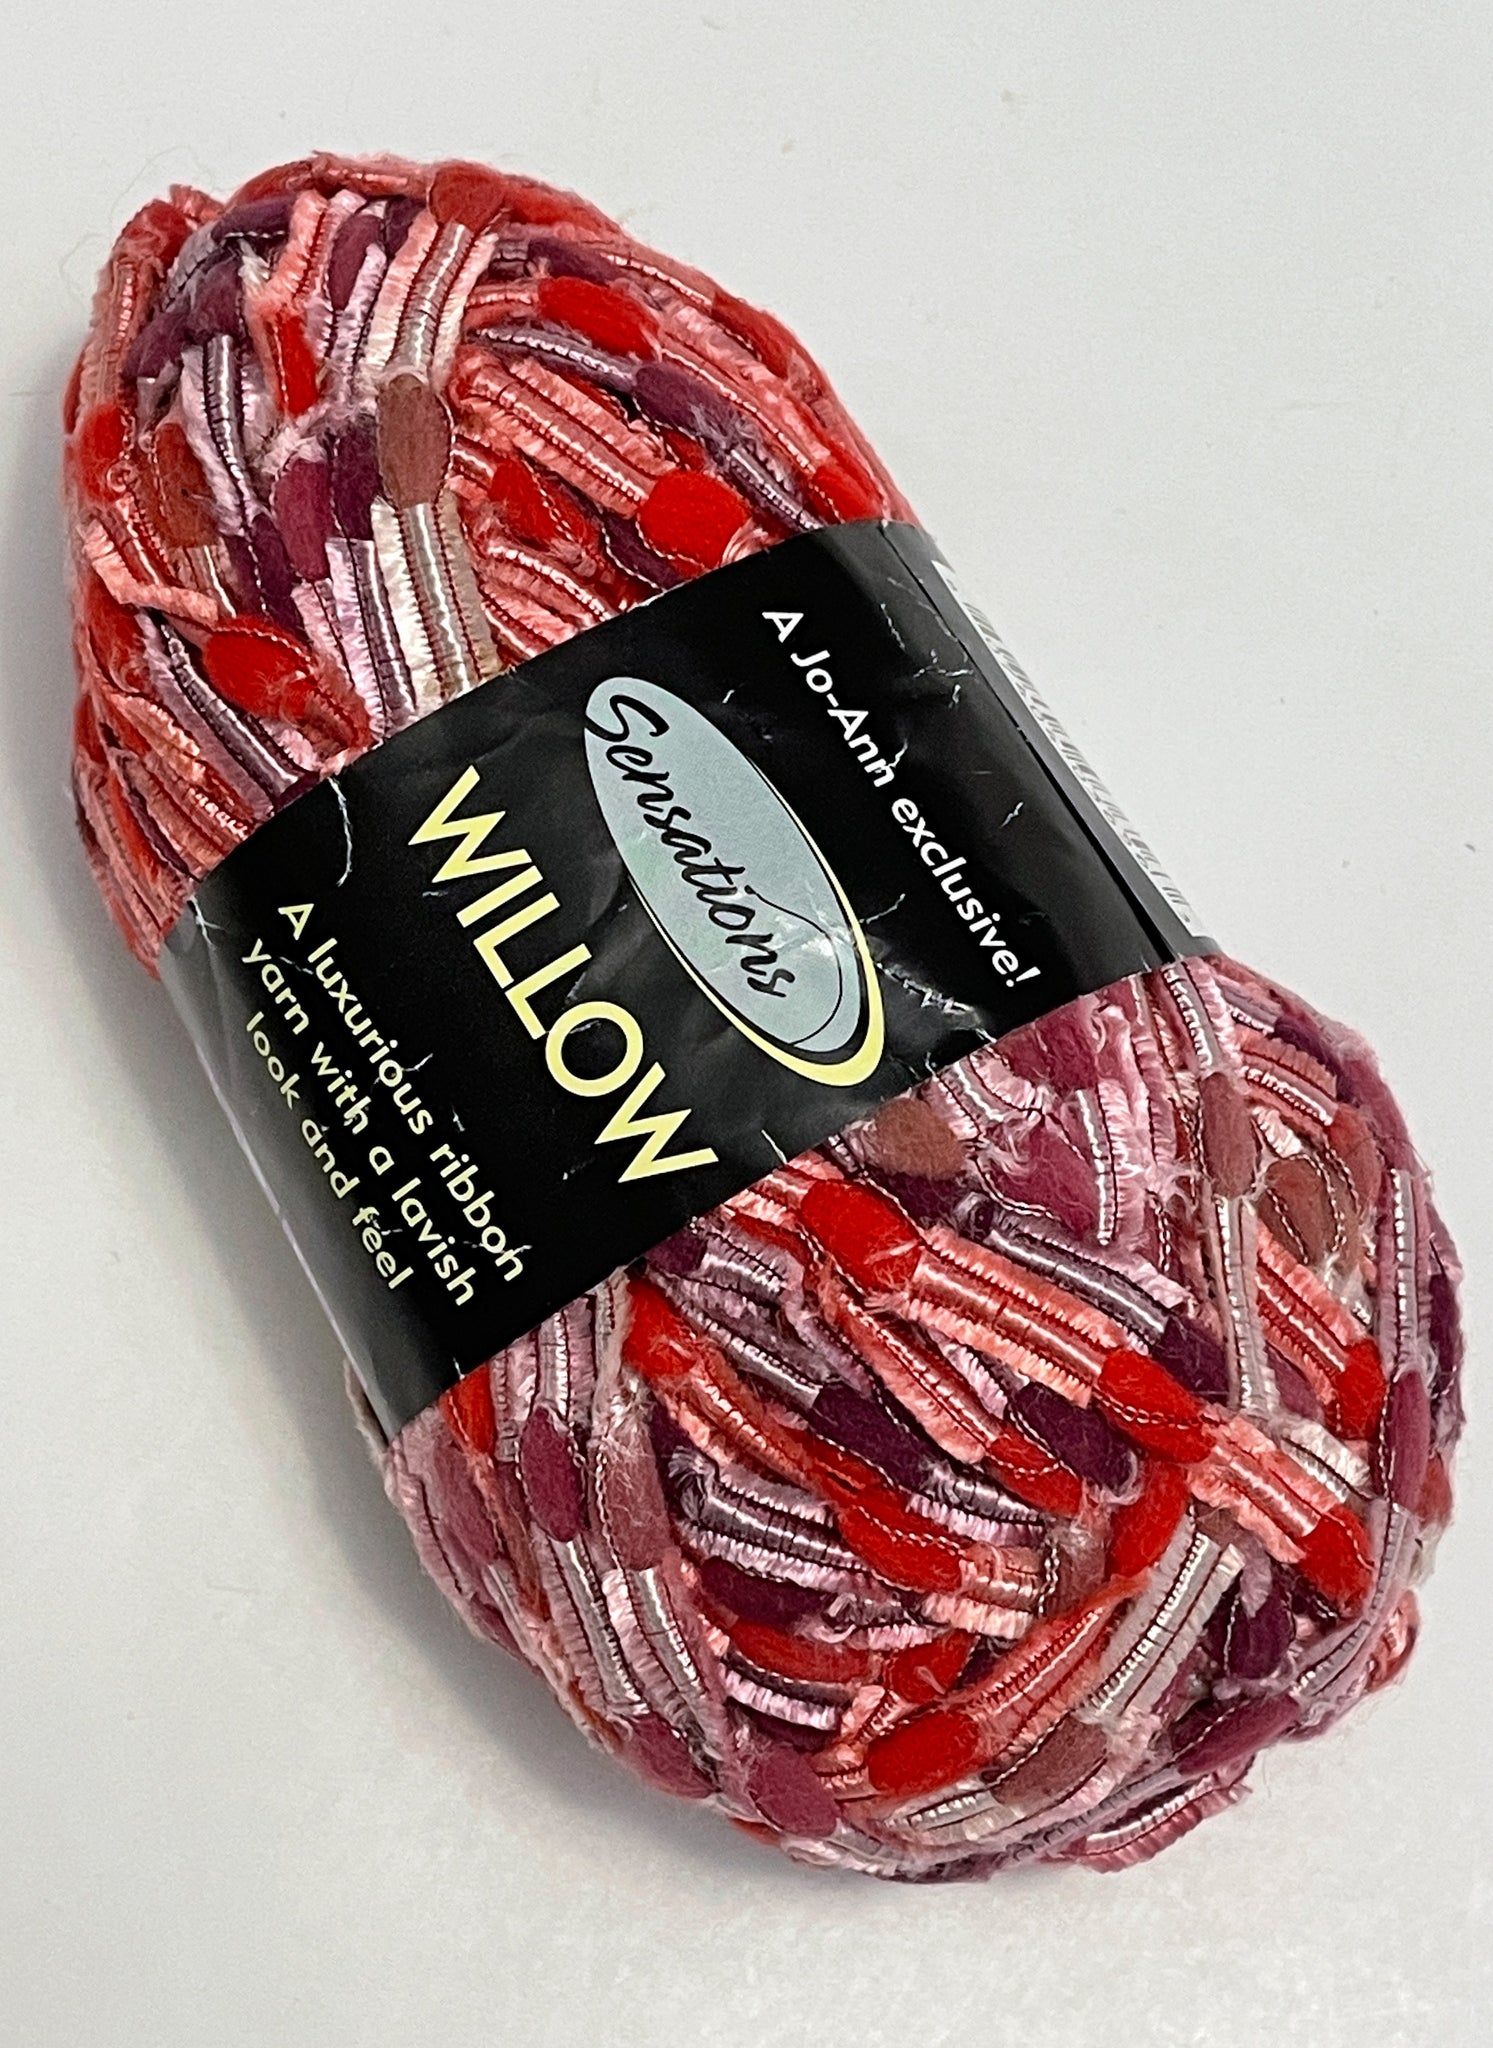 Yarn Nylon/Rayon Blend - Variegated Red and Burgundy